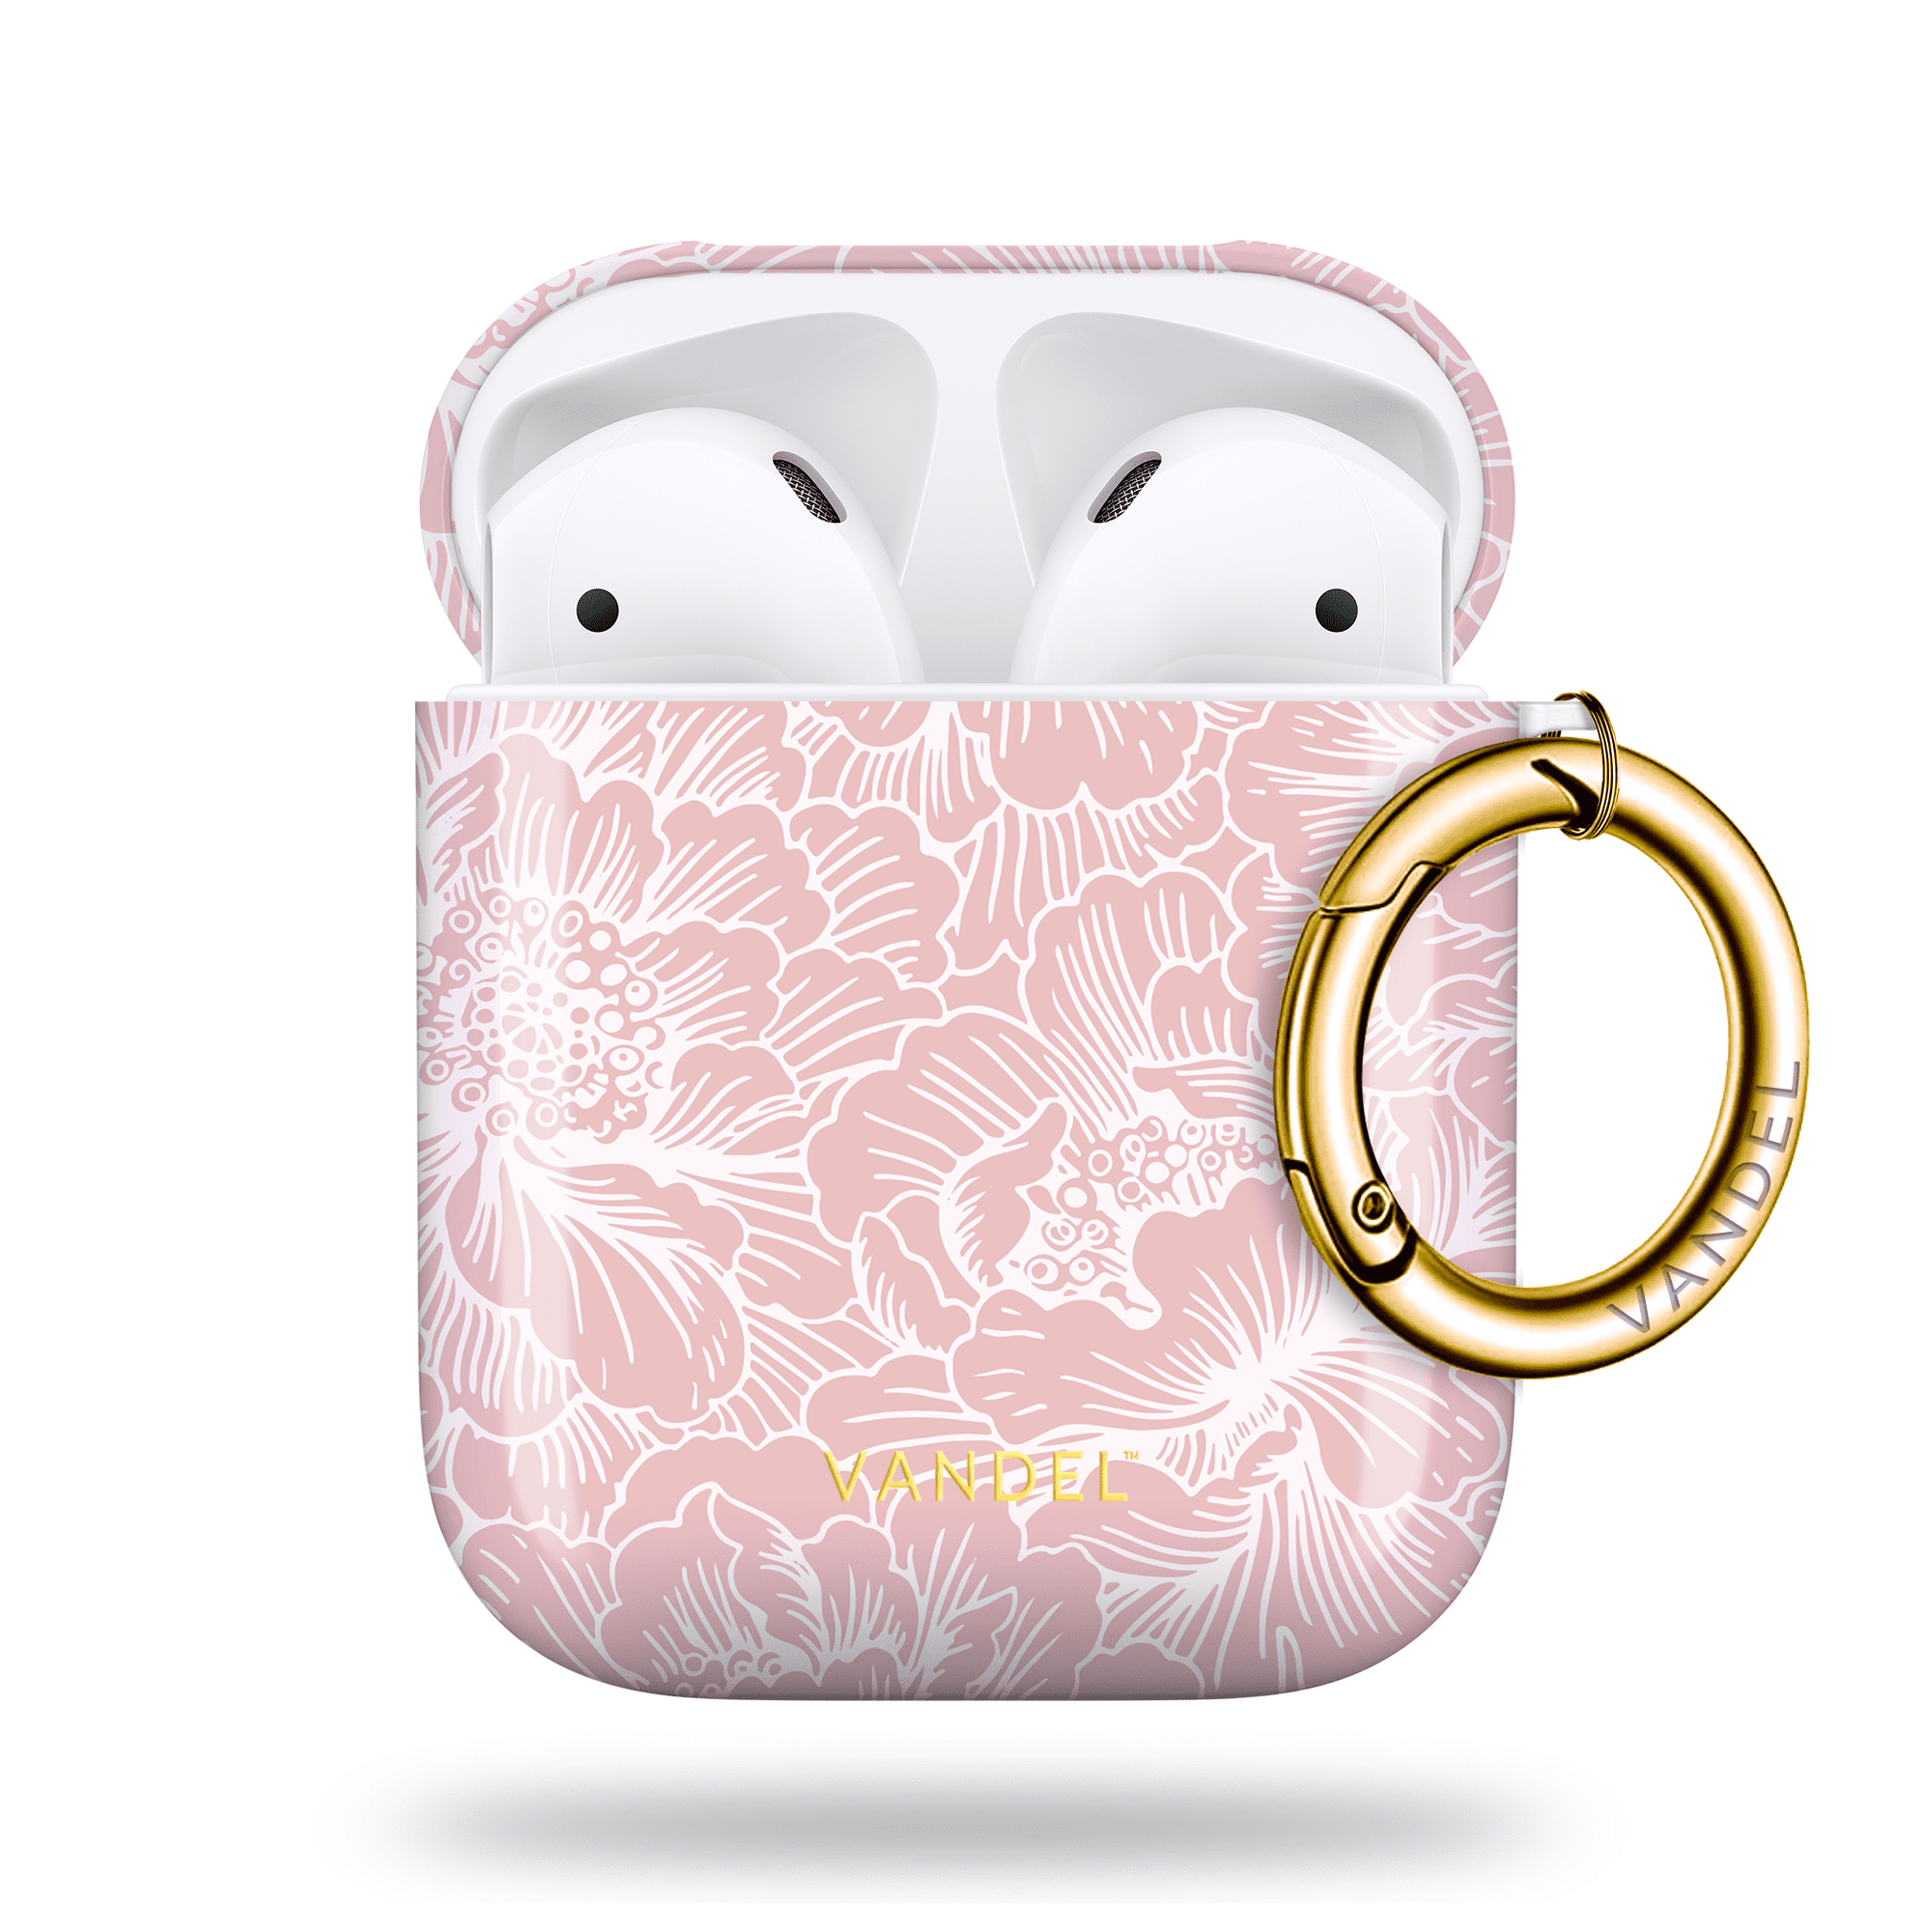 Fashion Designer AirPods Case For 1/2 High Quality Airpods Pro Case Animal  Letter Printed Protection Package From Suprecase, $10.56